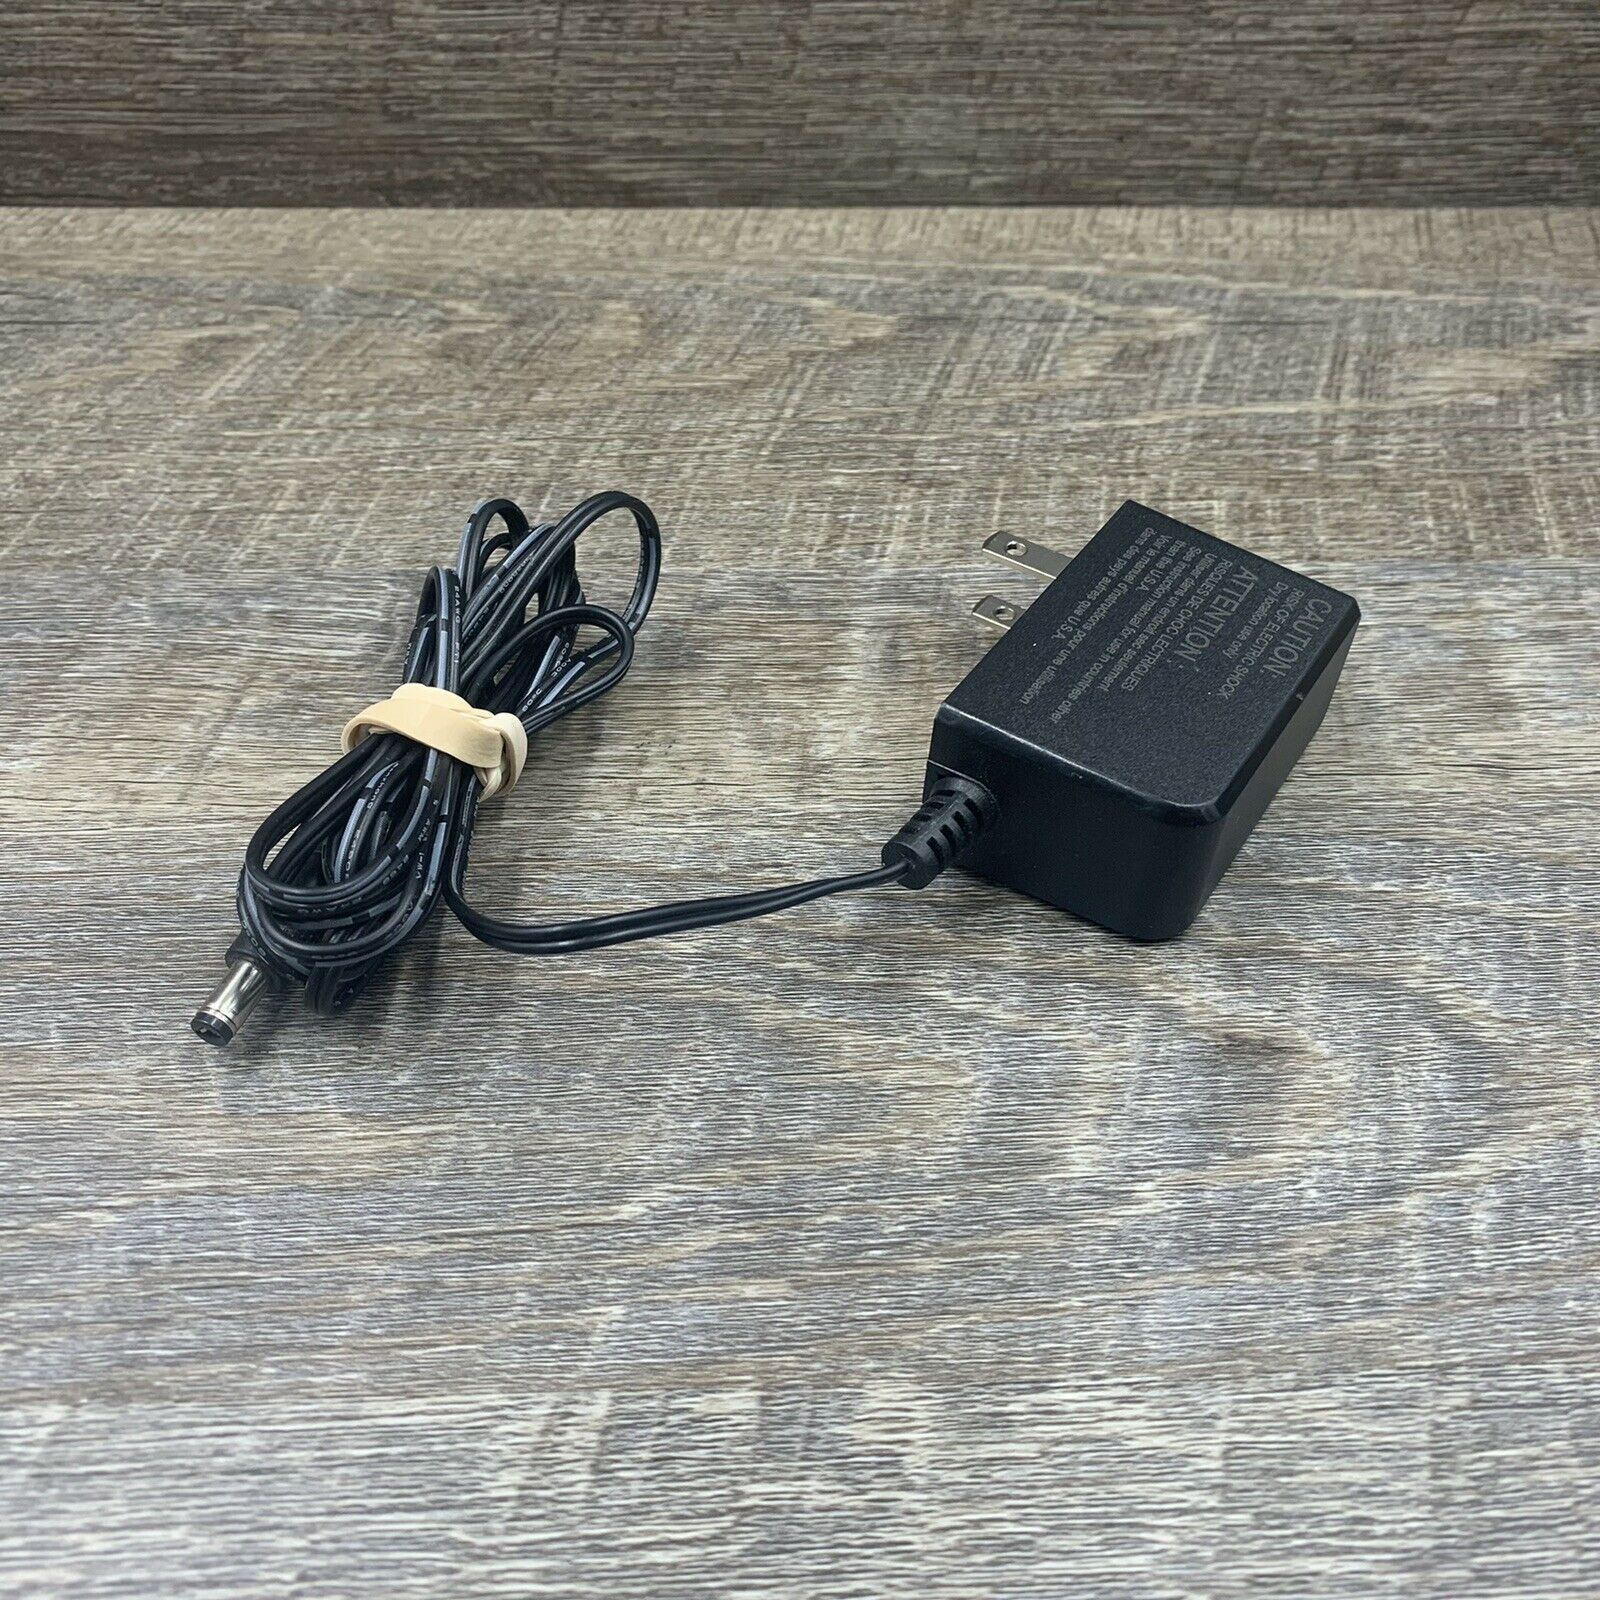 *Brand NEW*AMC AC Adapter Model AD-0121900060US 19V 0.6A Class 2 Power Supply